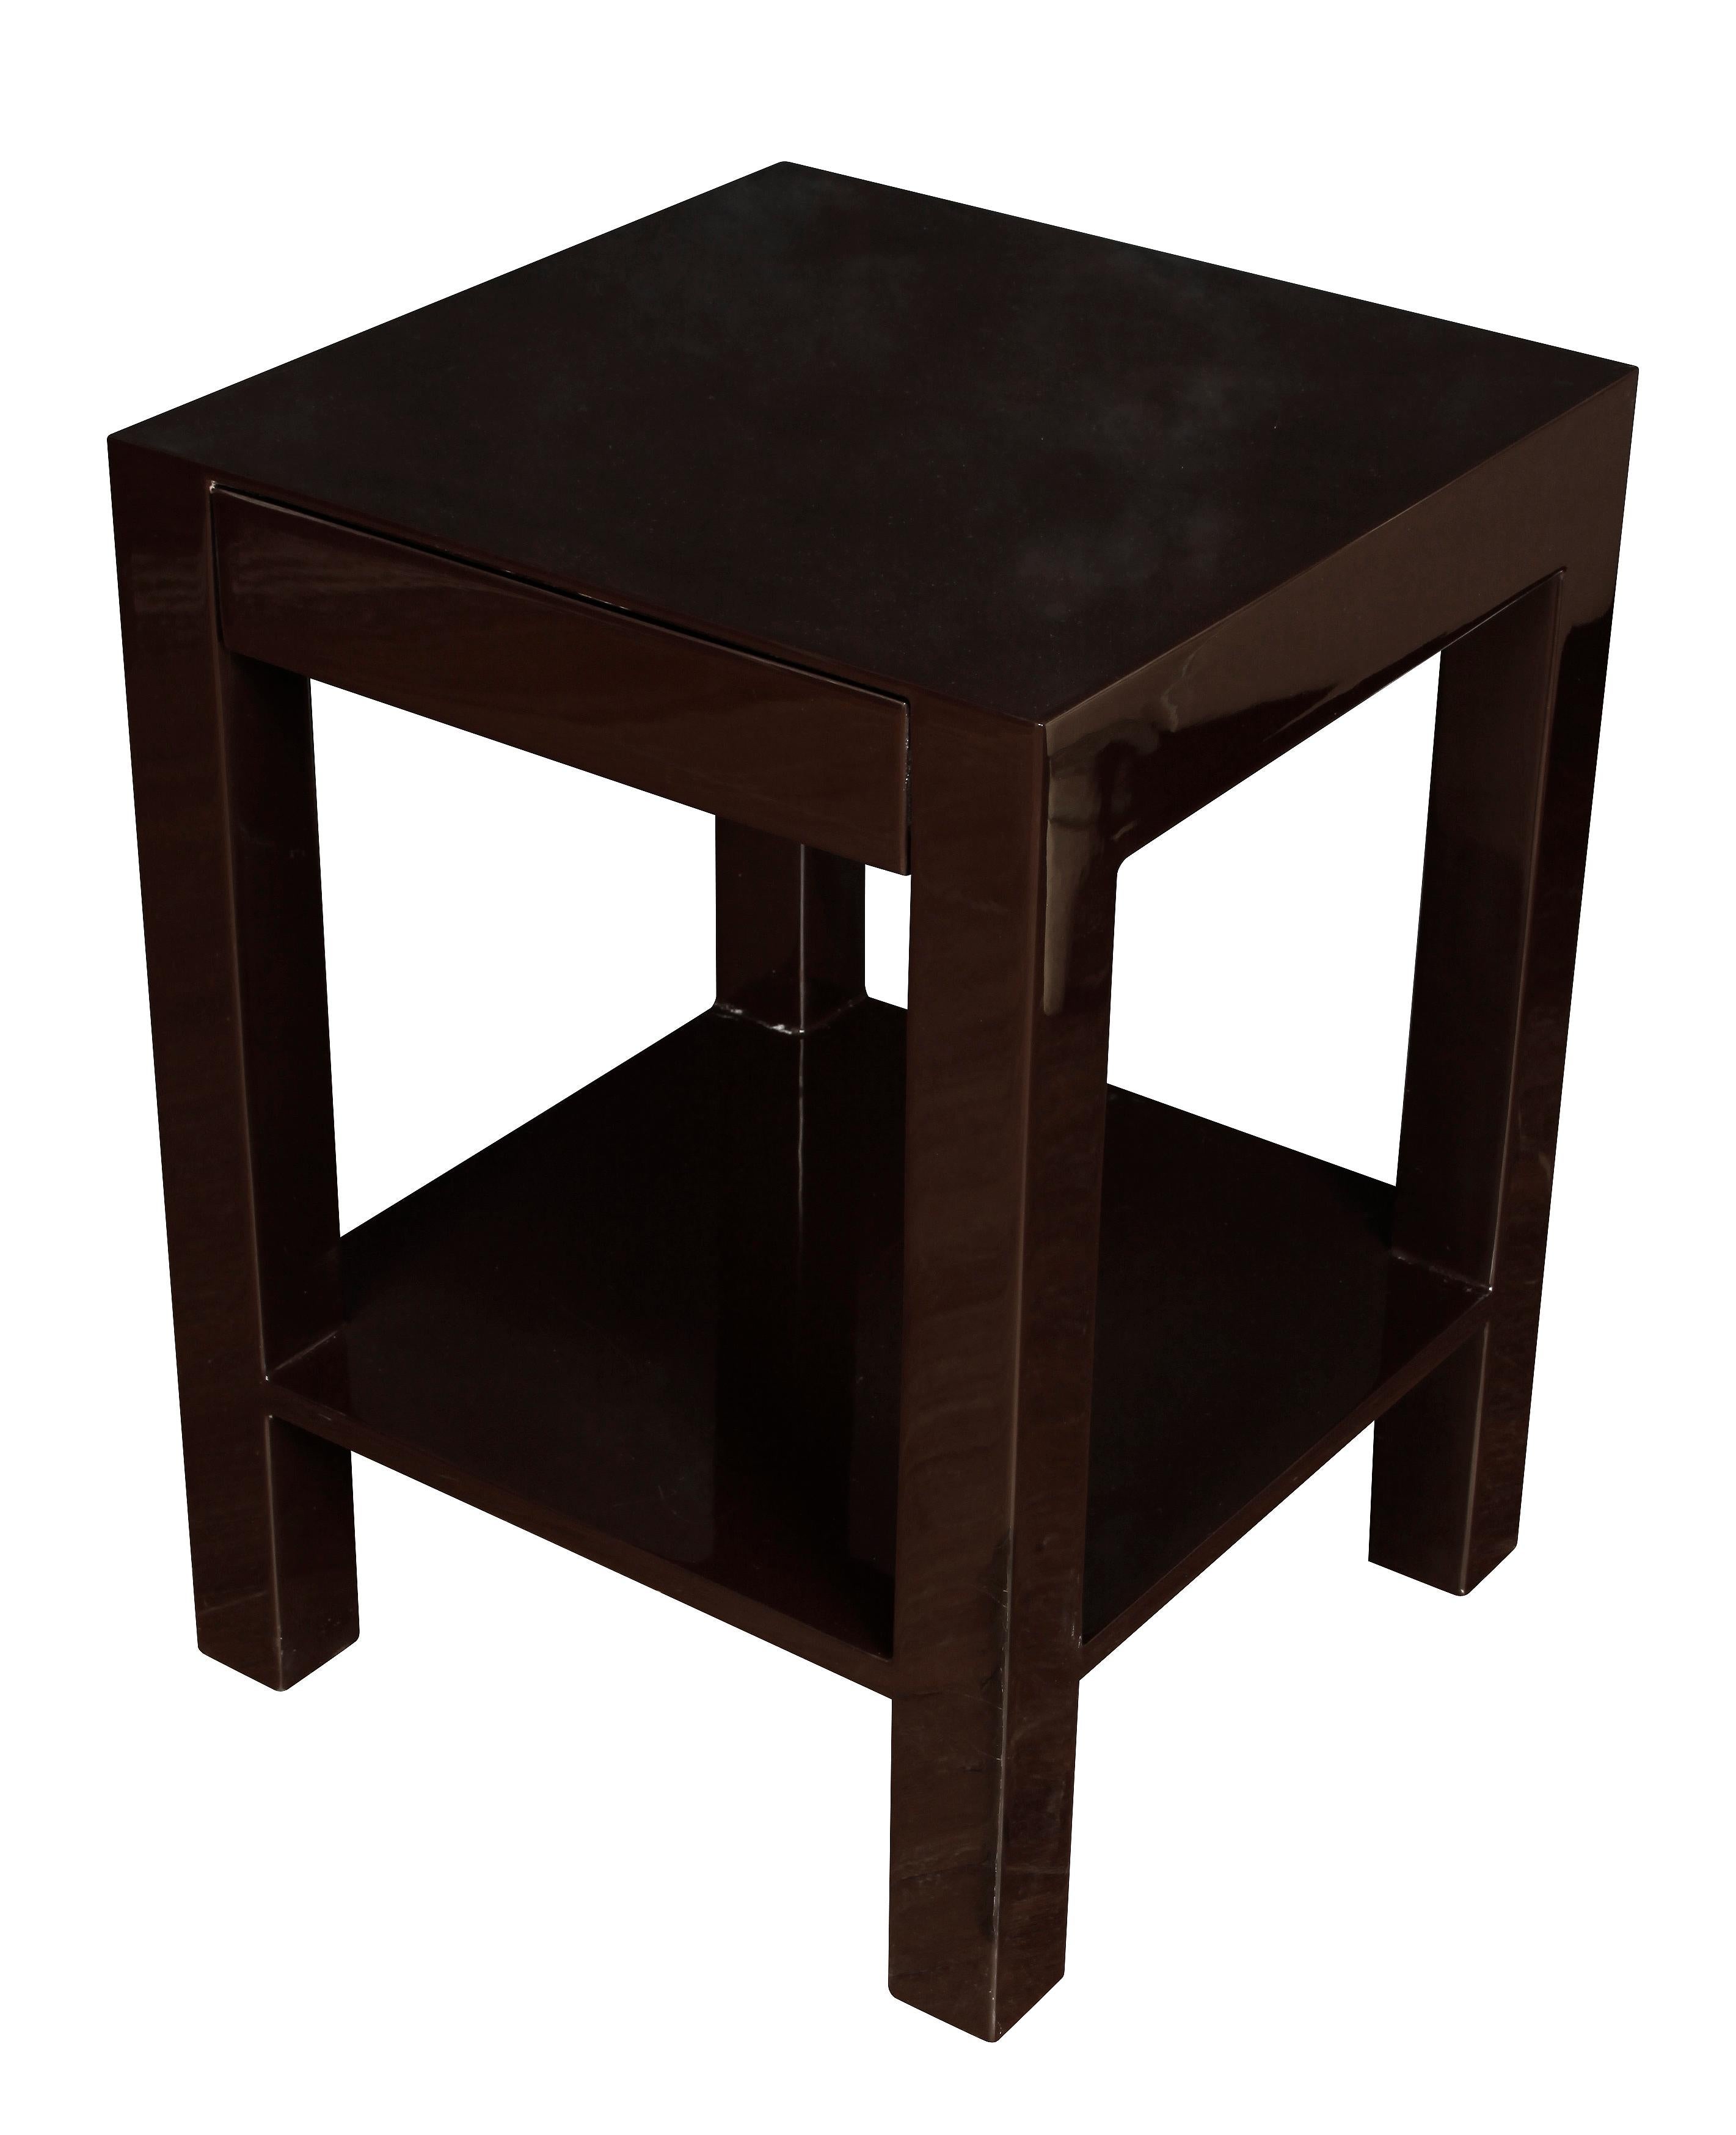 A pair of high gloss brown lacquer side tables in modern parsons style with a low shelf.